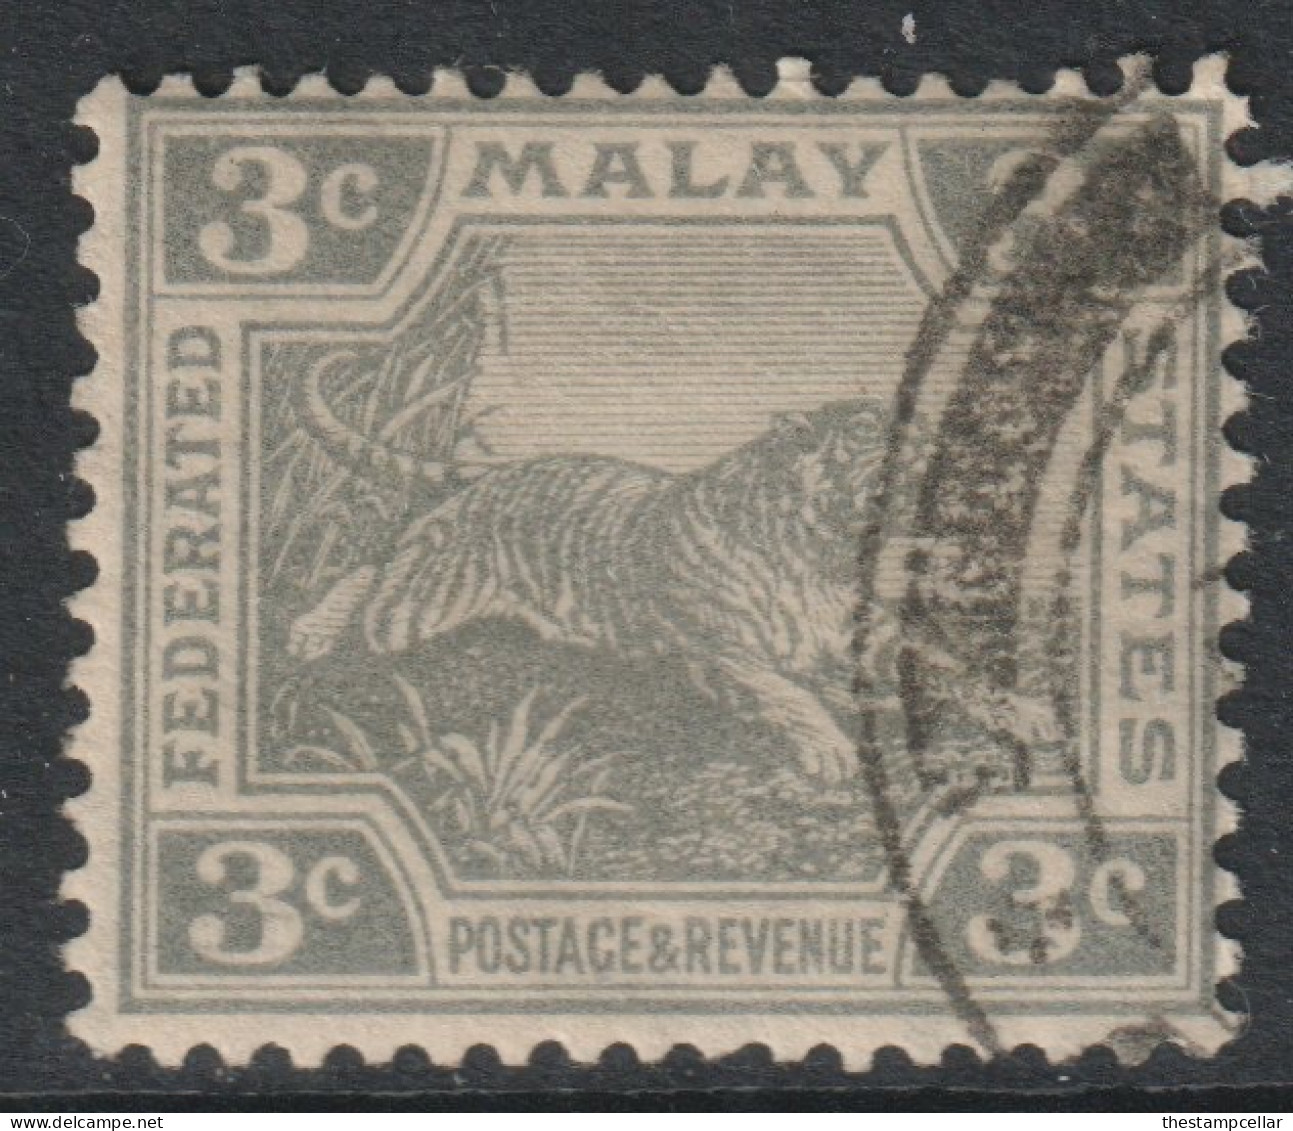 Malaya Federated States FMS Scott 53 - SG56, 1922 Leaping Tiger 3c Grey Used - Federated Malay States